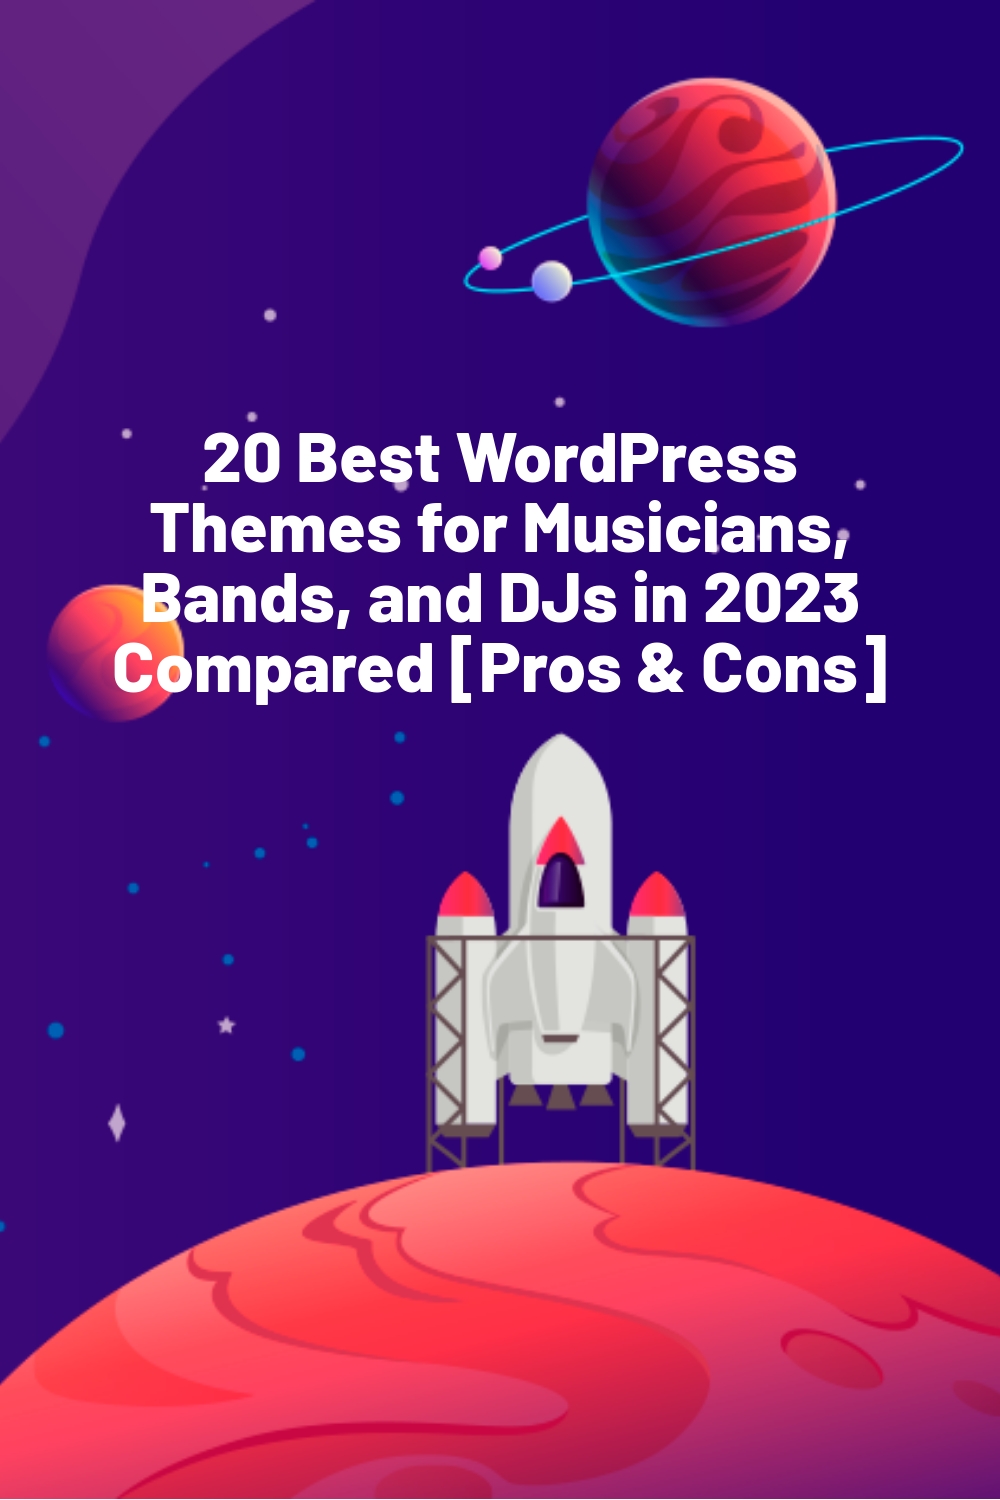 20 Best WordPress Themes for Musicians, Bands, and DJs in 2023 Compared [Pros & Cons]